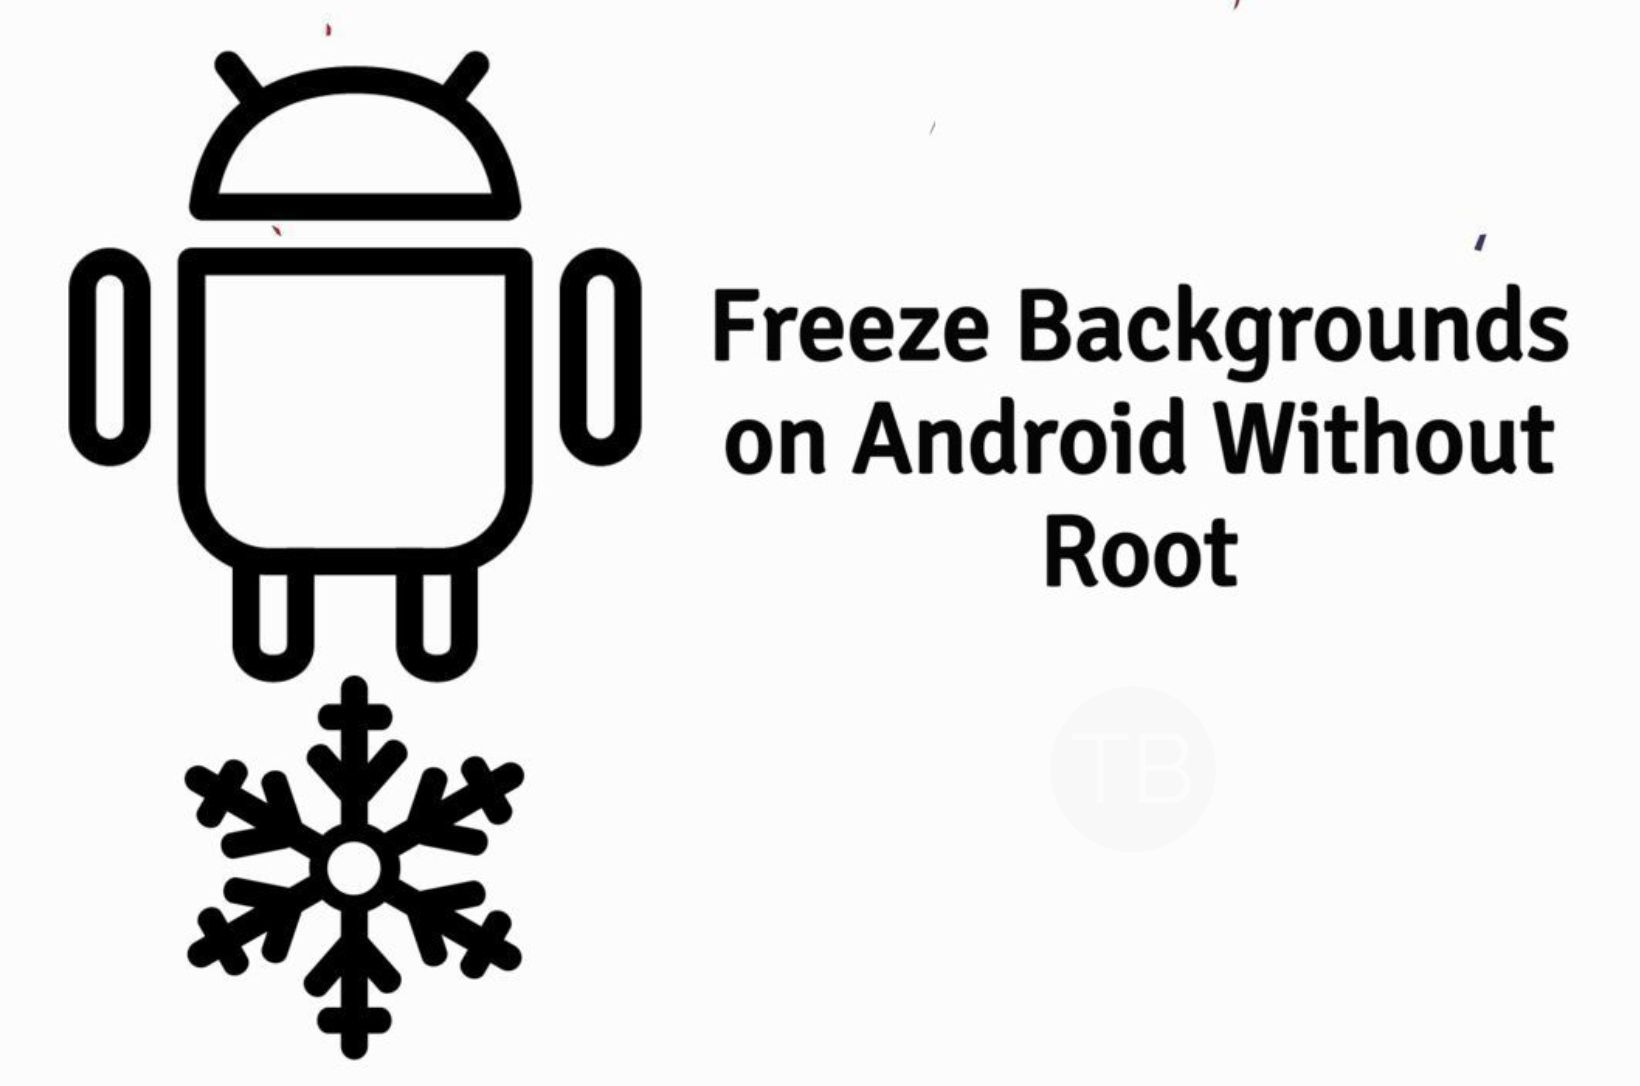 Freeze Background Apps on Android